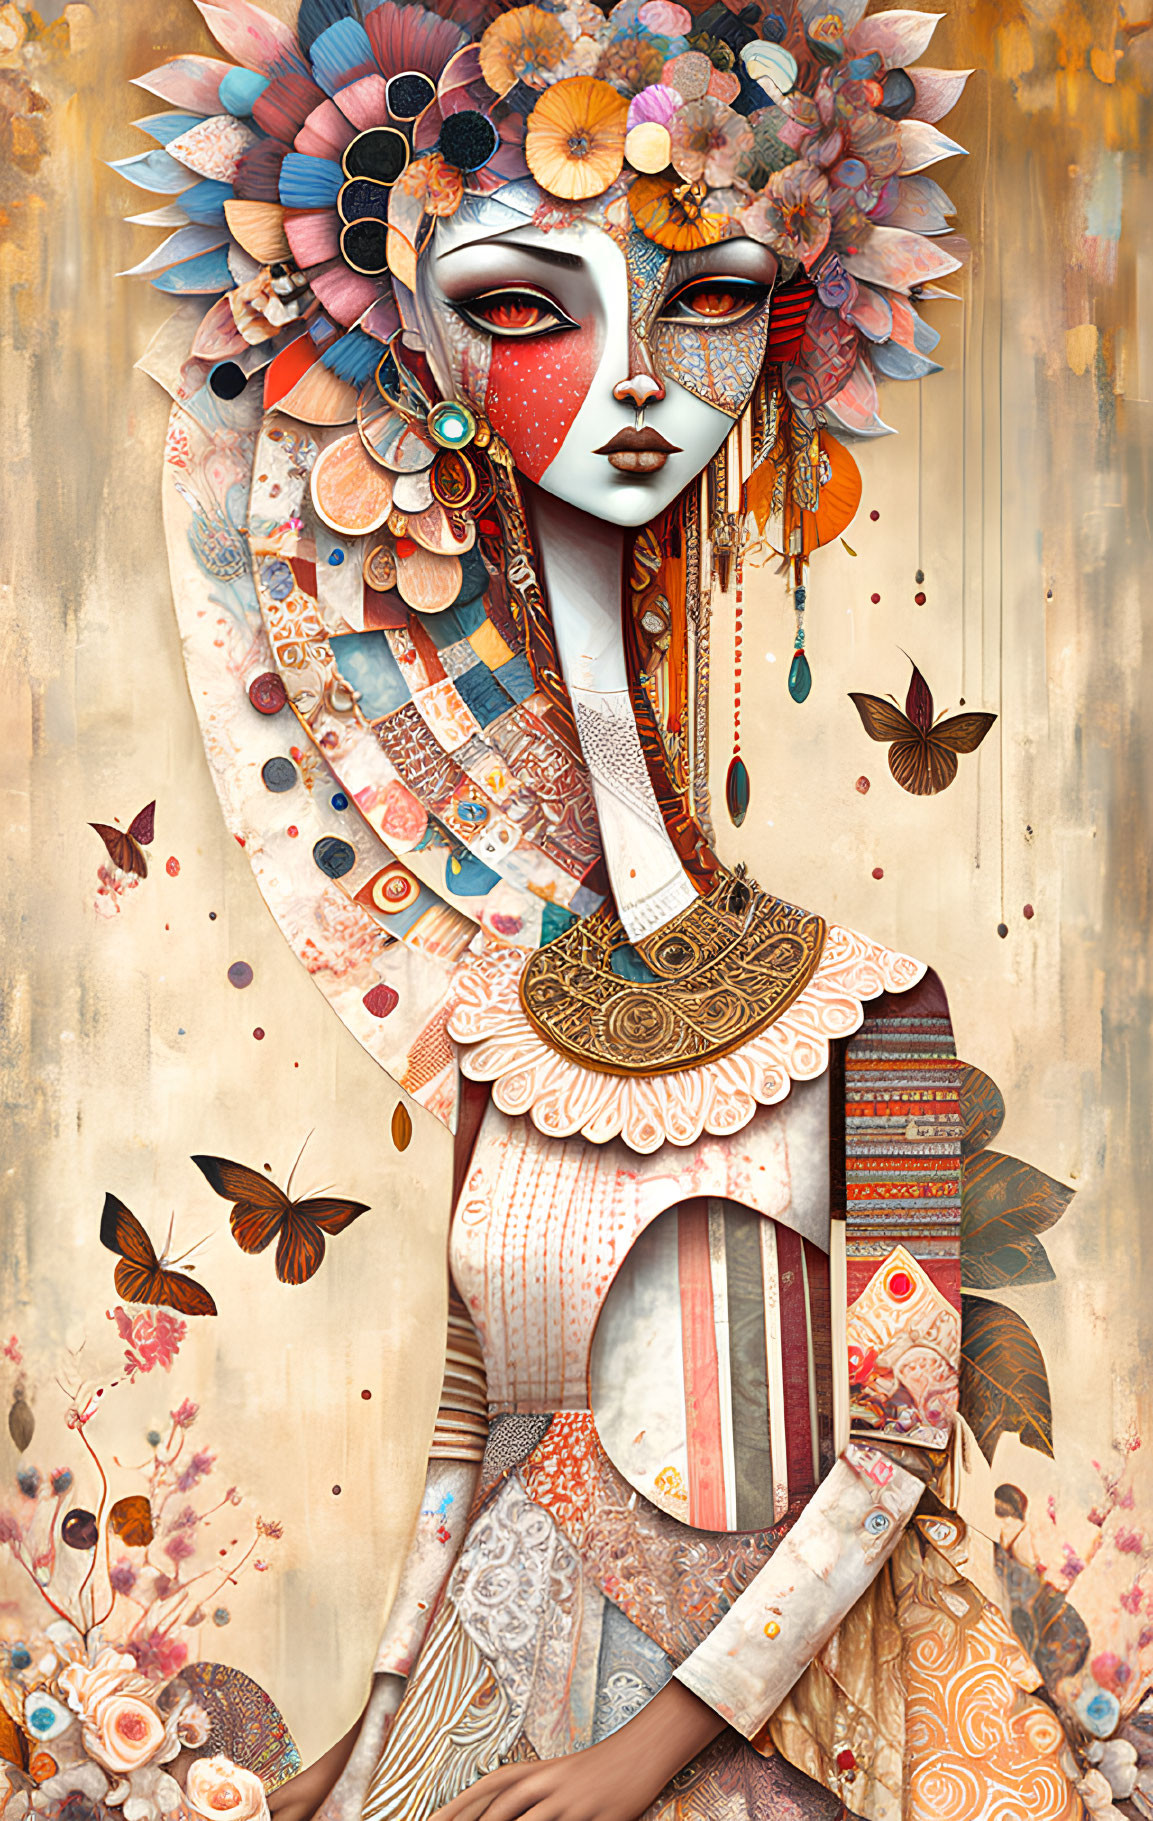 Vibrant illustration of woman with floral headdress and butterflies